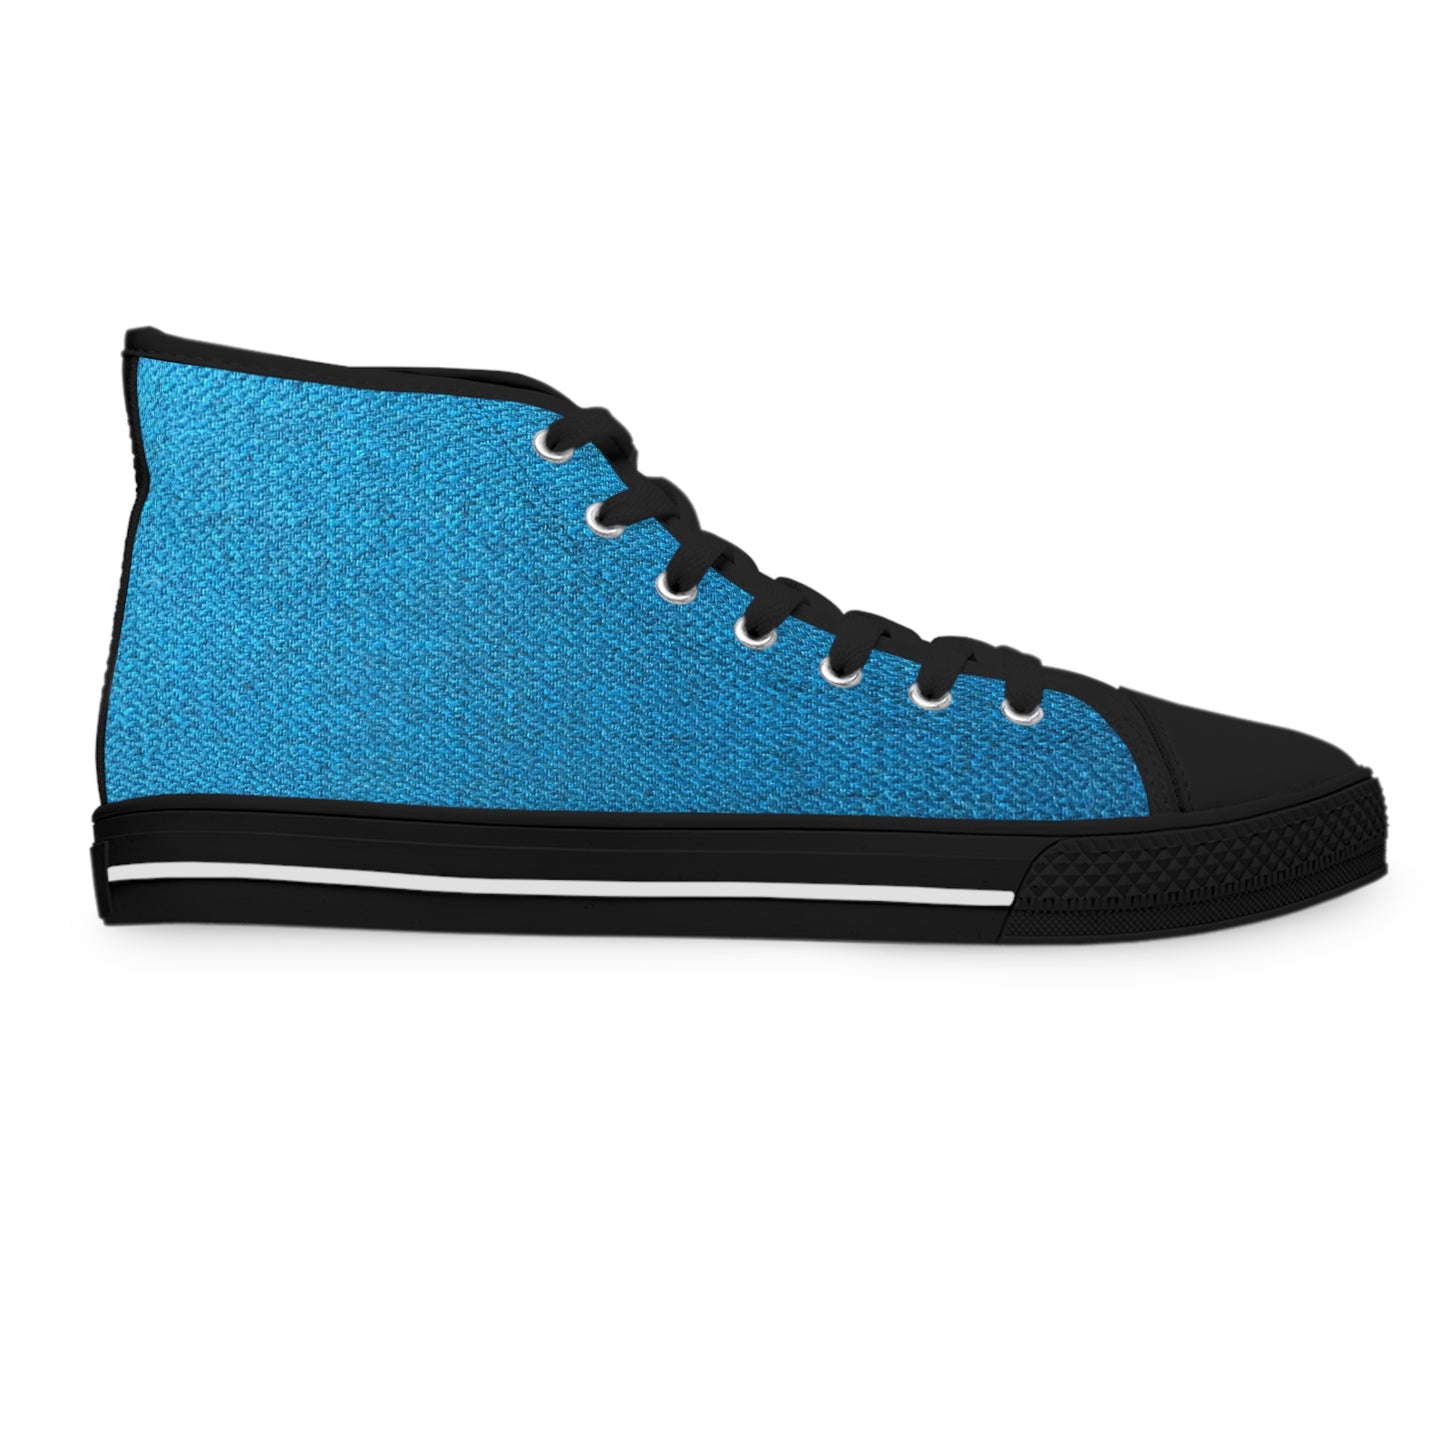 Limited Edition High Top Sneakers - Fuel